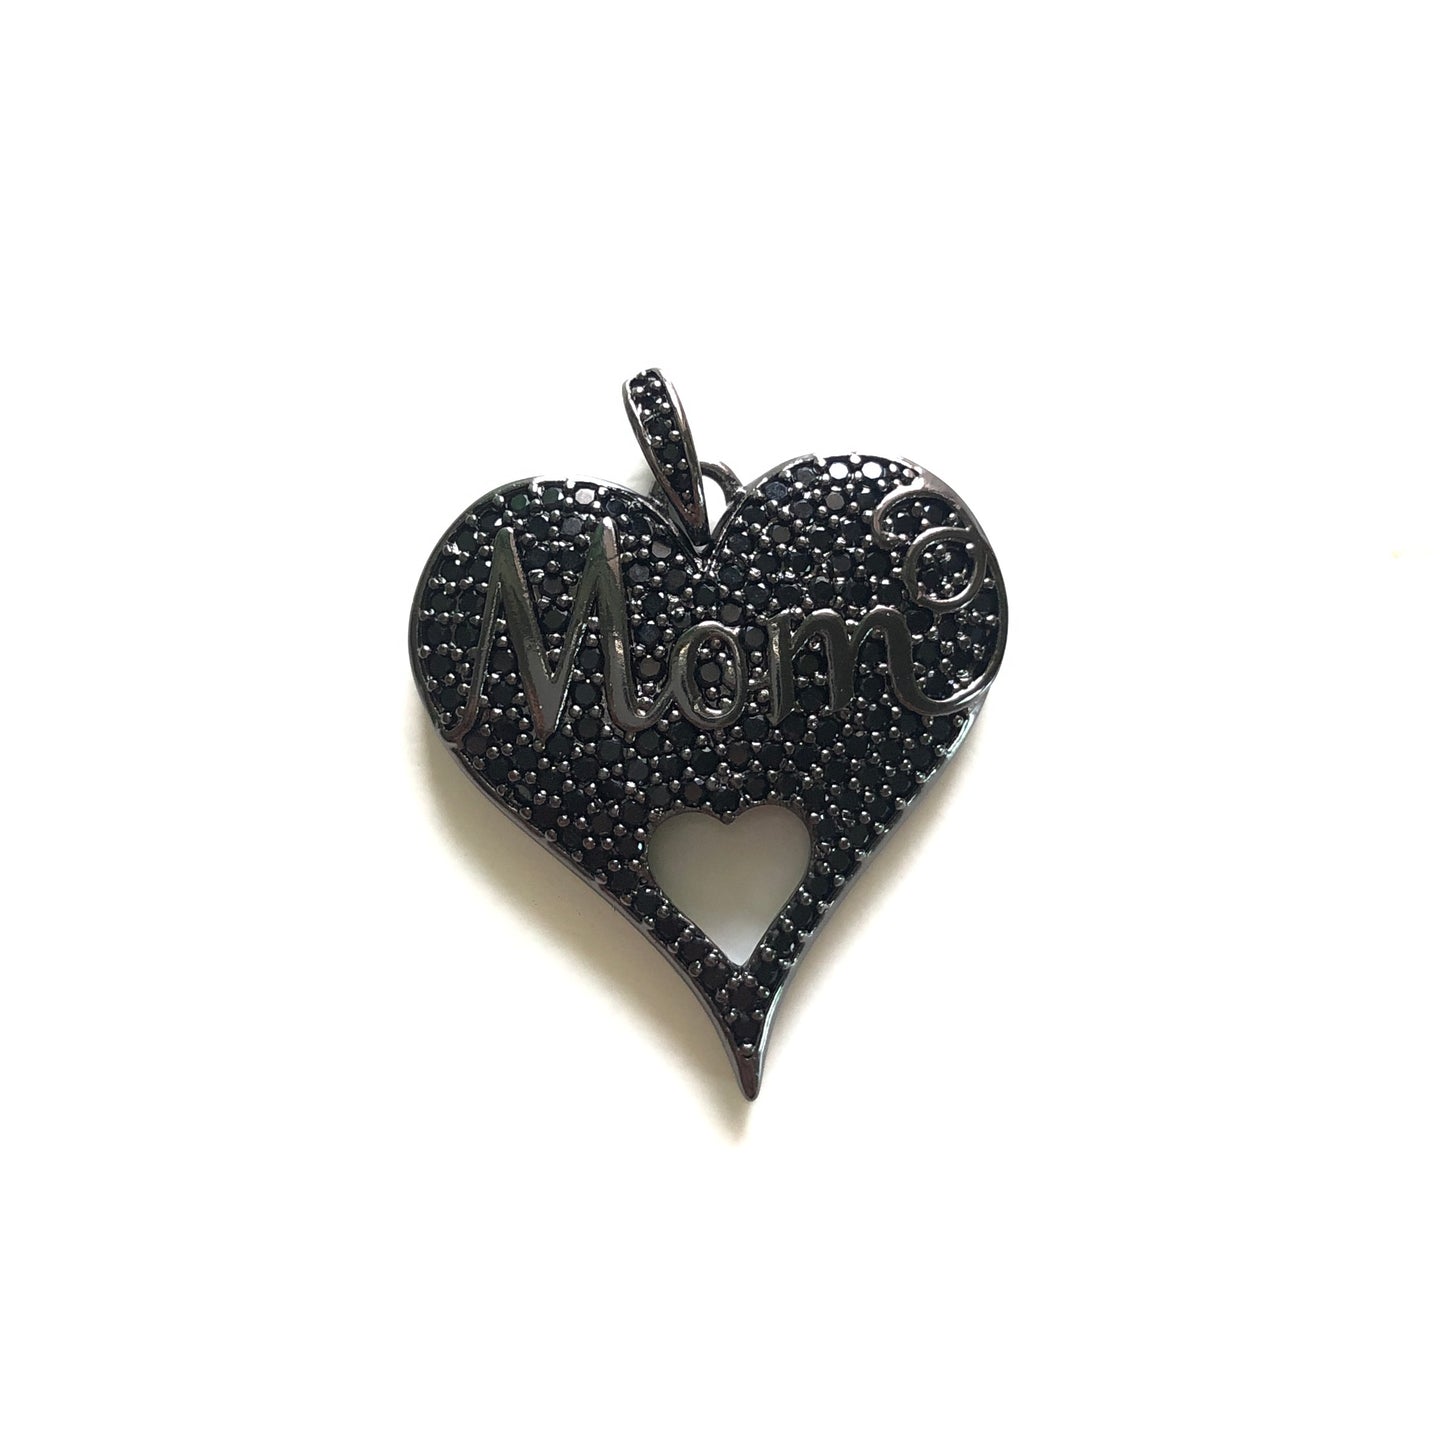 10pcs/lot 26*24.5mm CZ Paved Love Mom Heart Charms for Mother's Day Black on Black CZ Paved Charms Hearts Mother's Day Charms Beads Beyond